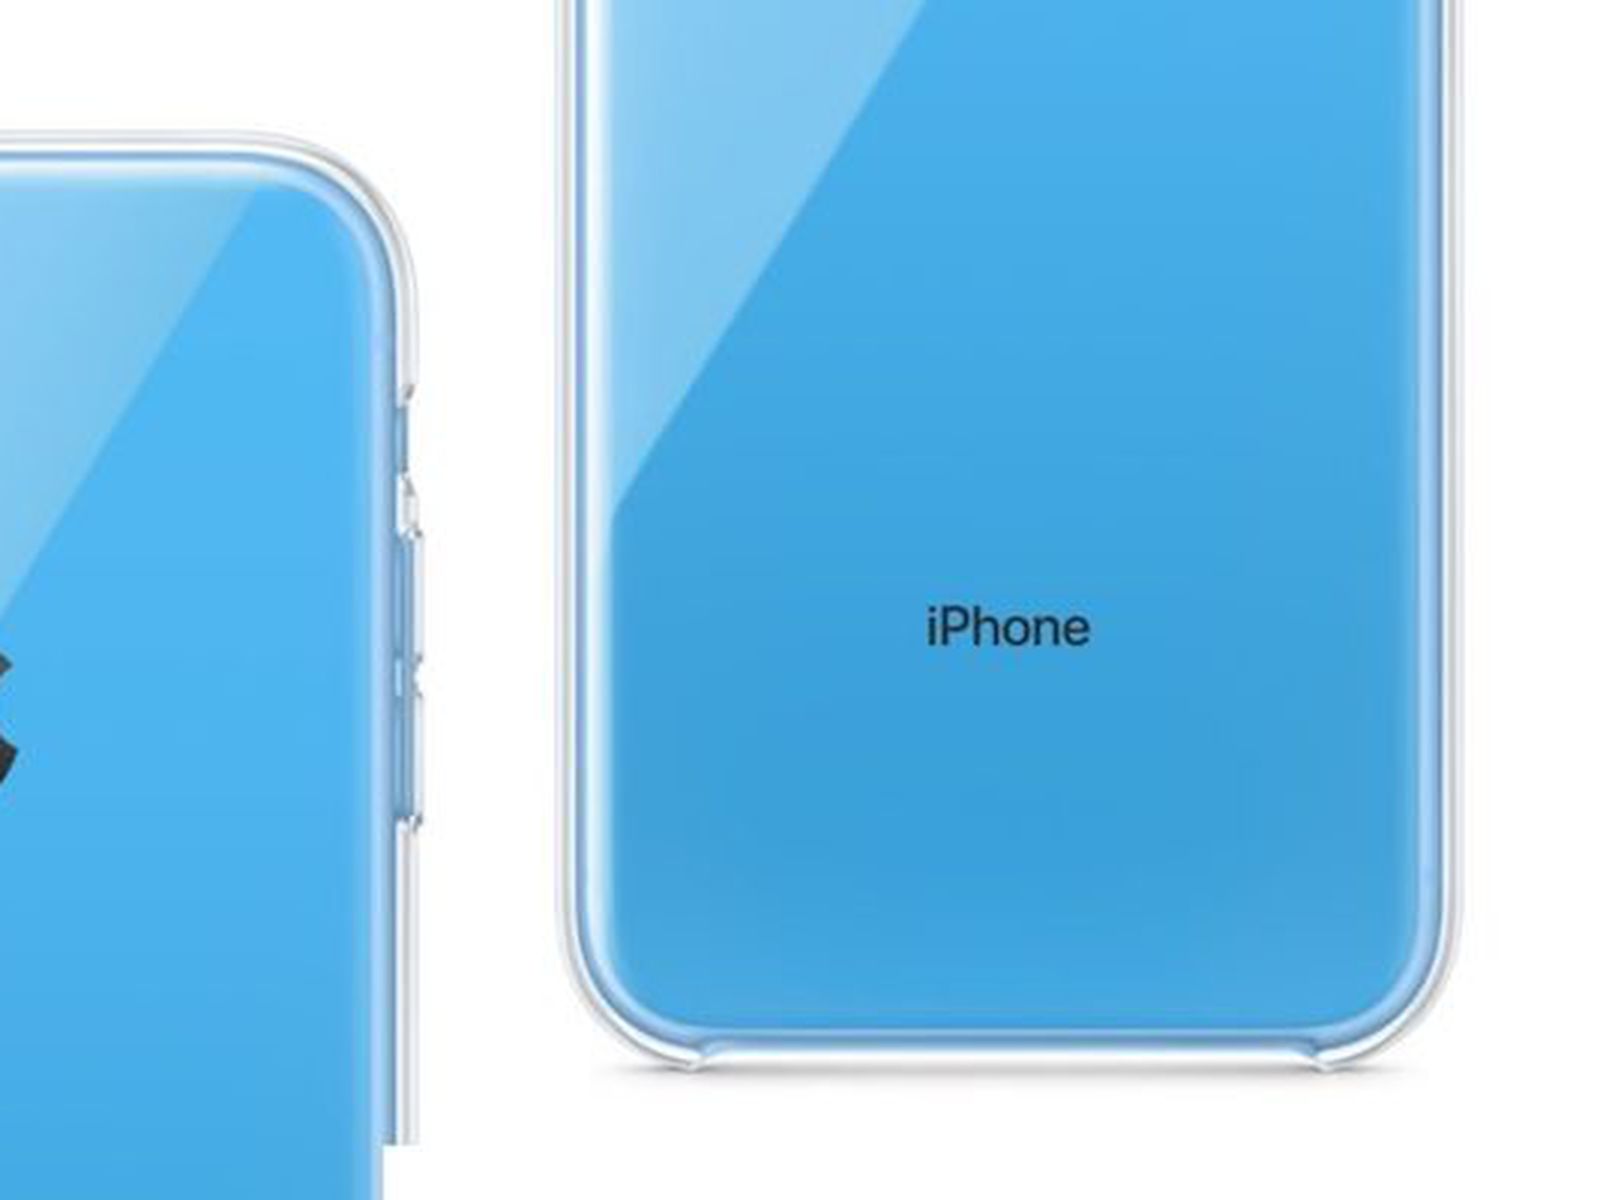 Apple plans to sell a clear case for the iPhone XR